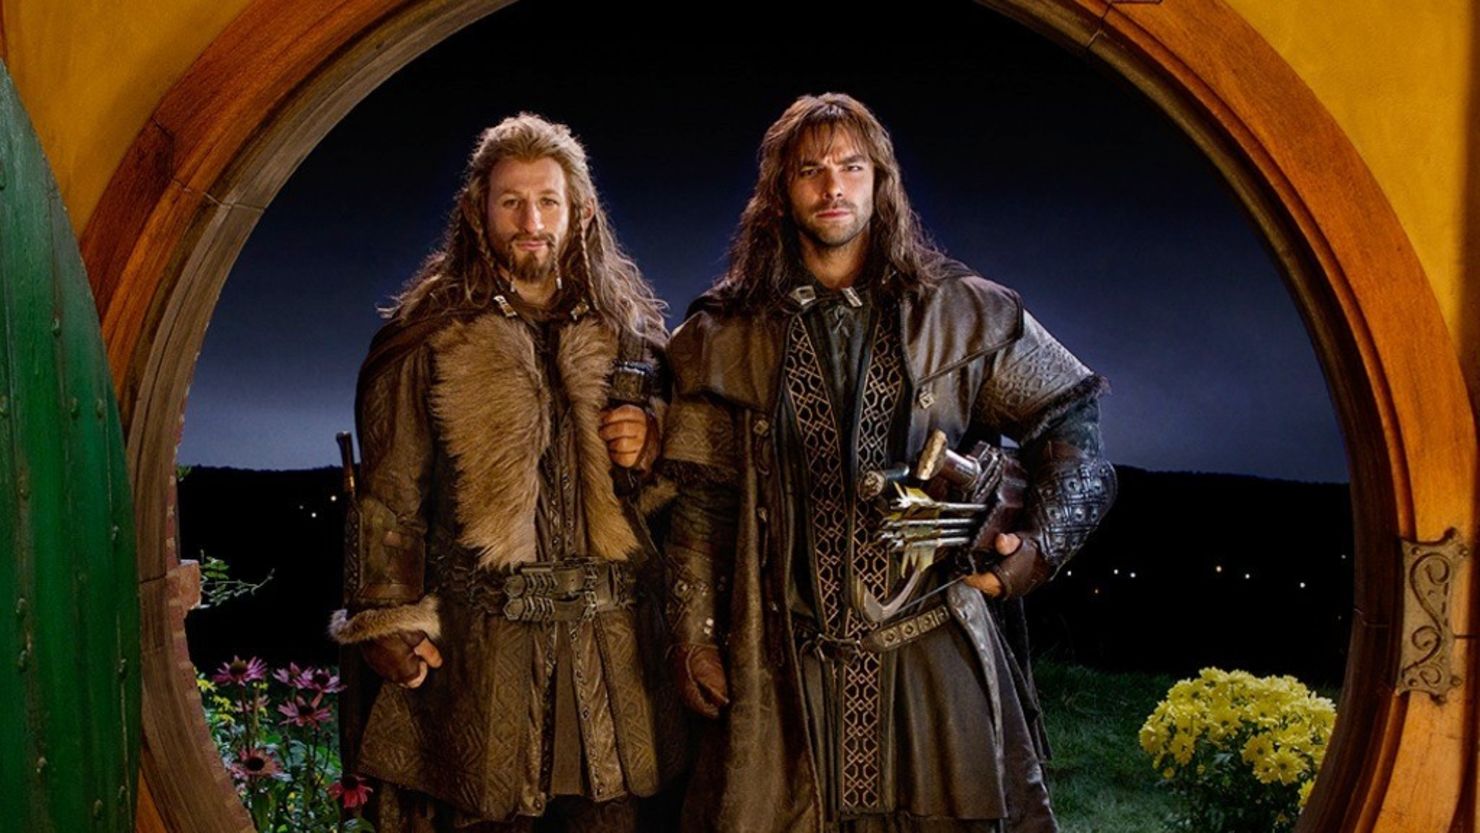 Dean O'Gorman and Aidan Turner star in "The Hobbit: An Unexpected Journey."